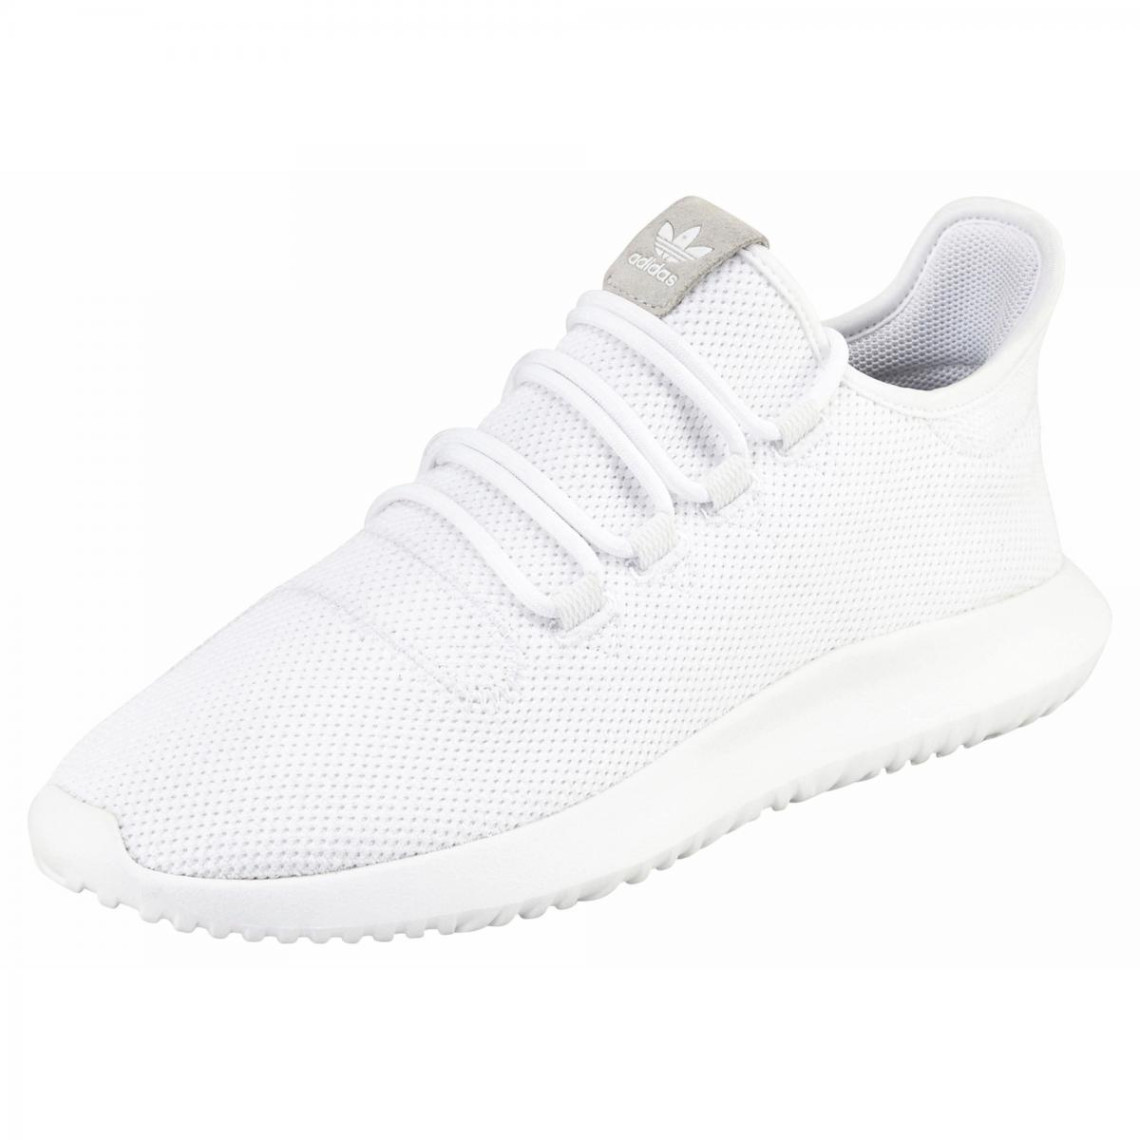 sneakers blanches femme adidas puma